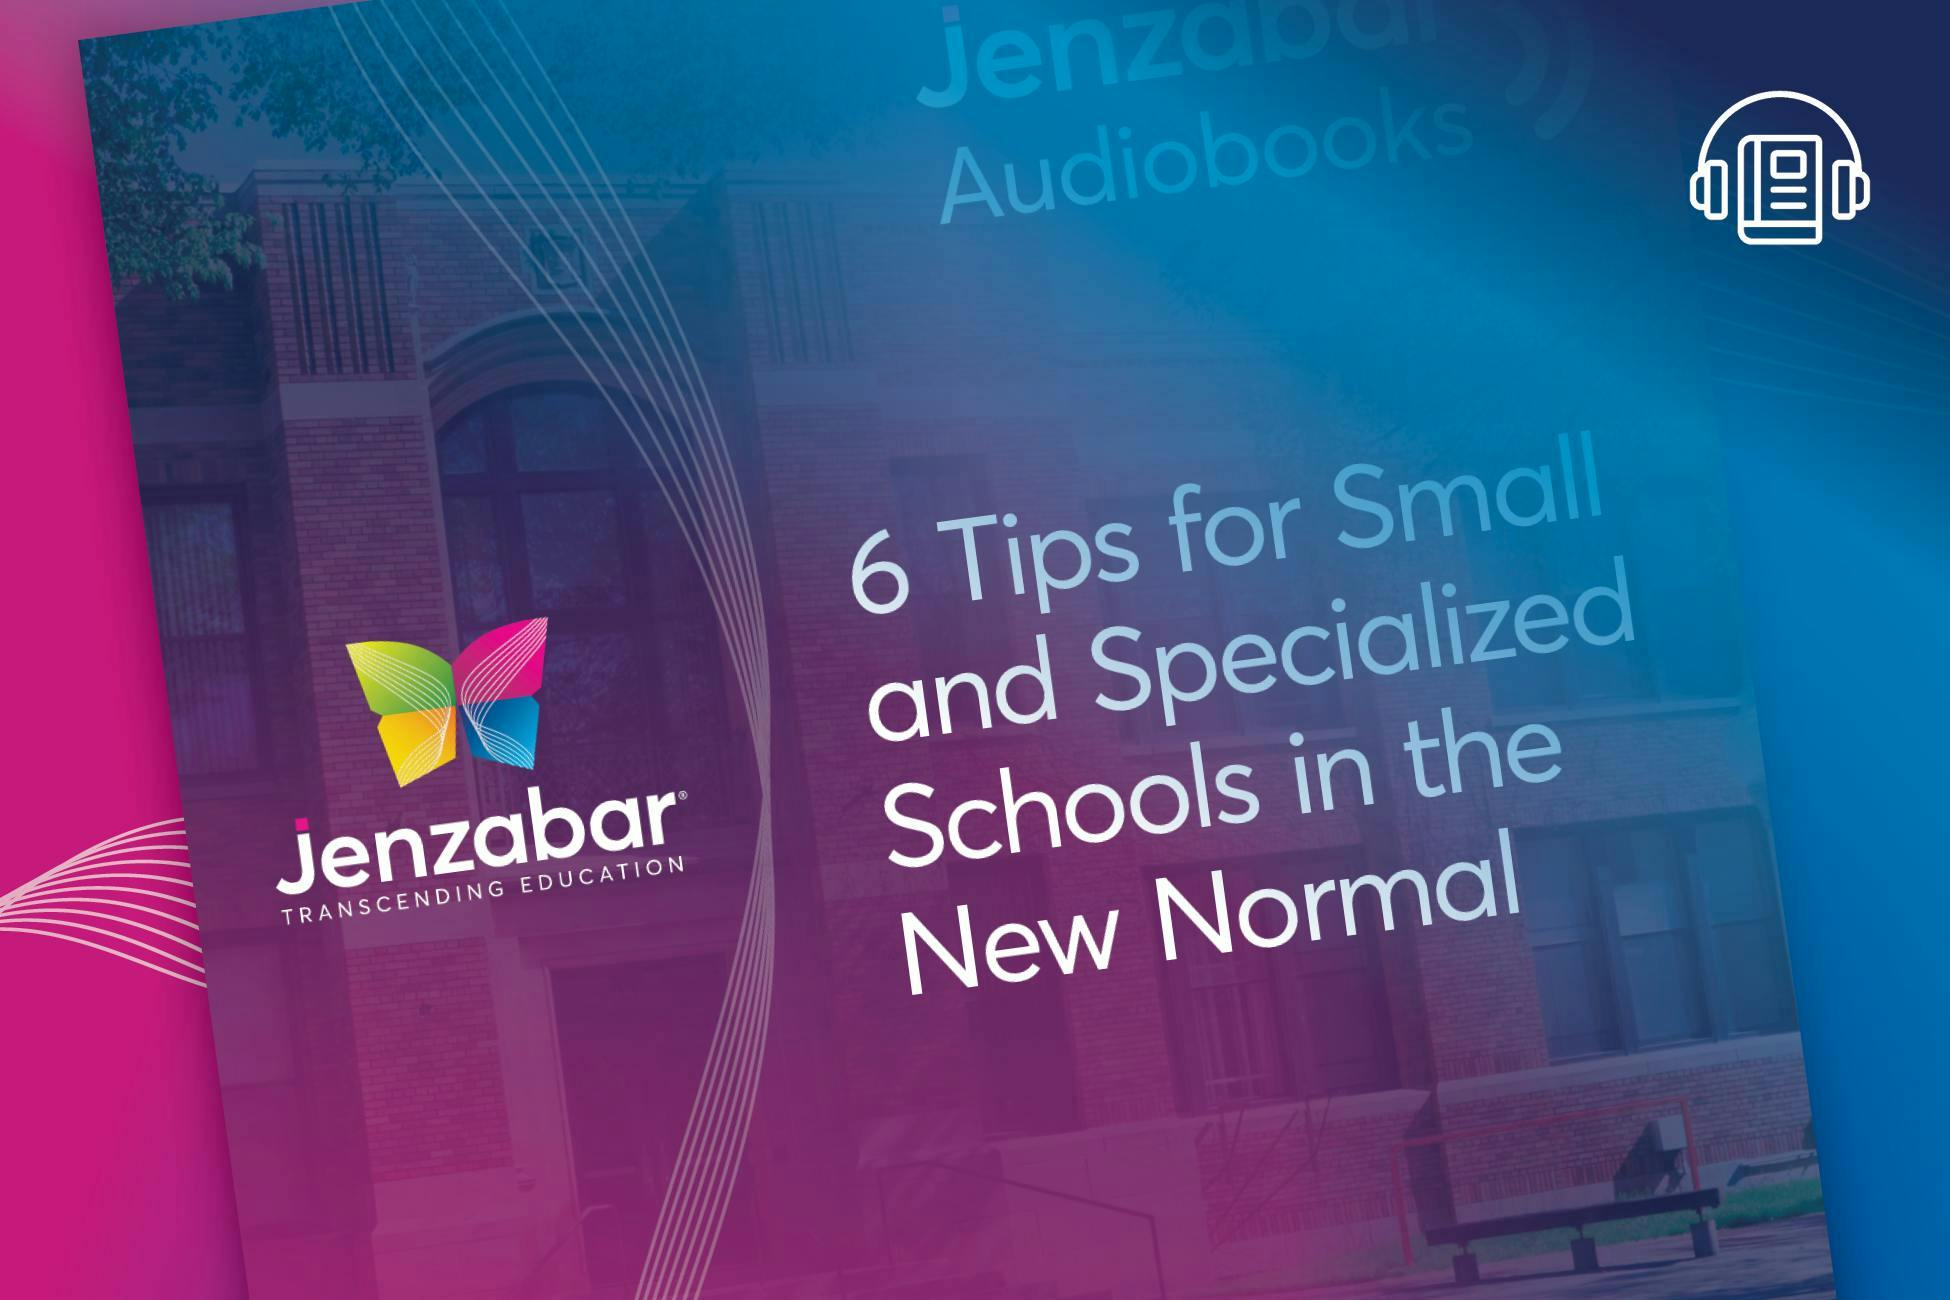 Audiobook: 6 Tips For Small and Specialized Schools in the New Normal